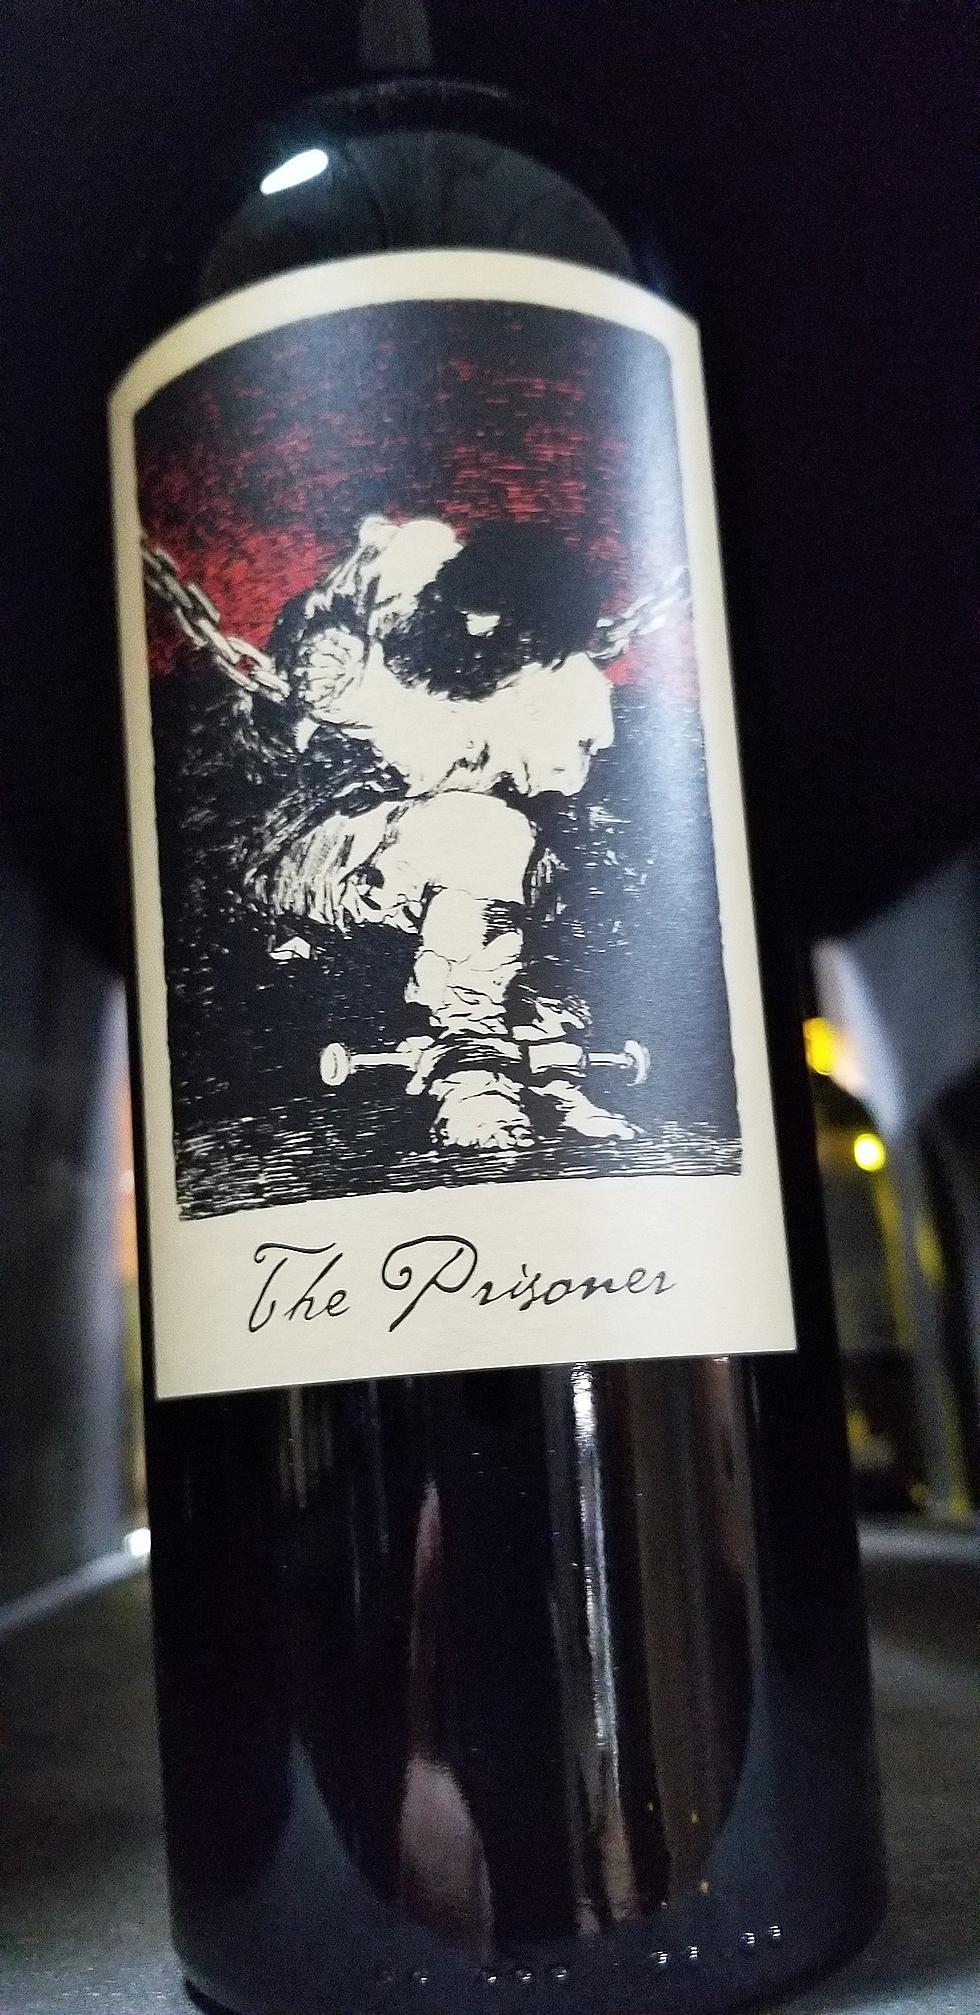 Wines of the Week Tastes Like Prisoner at a Price You&#8217;ll Like